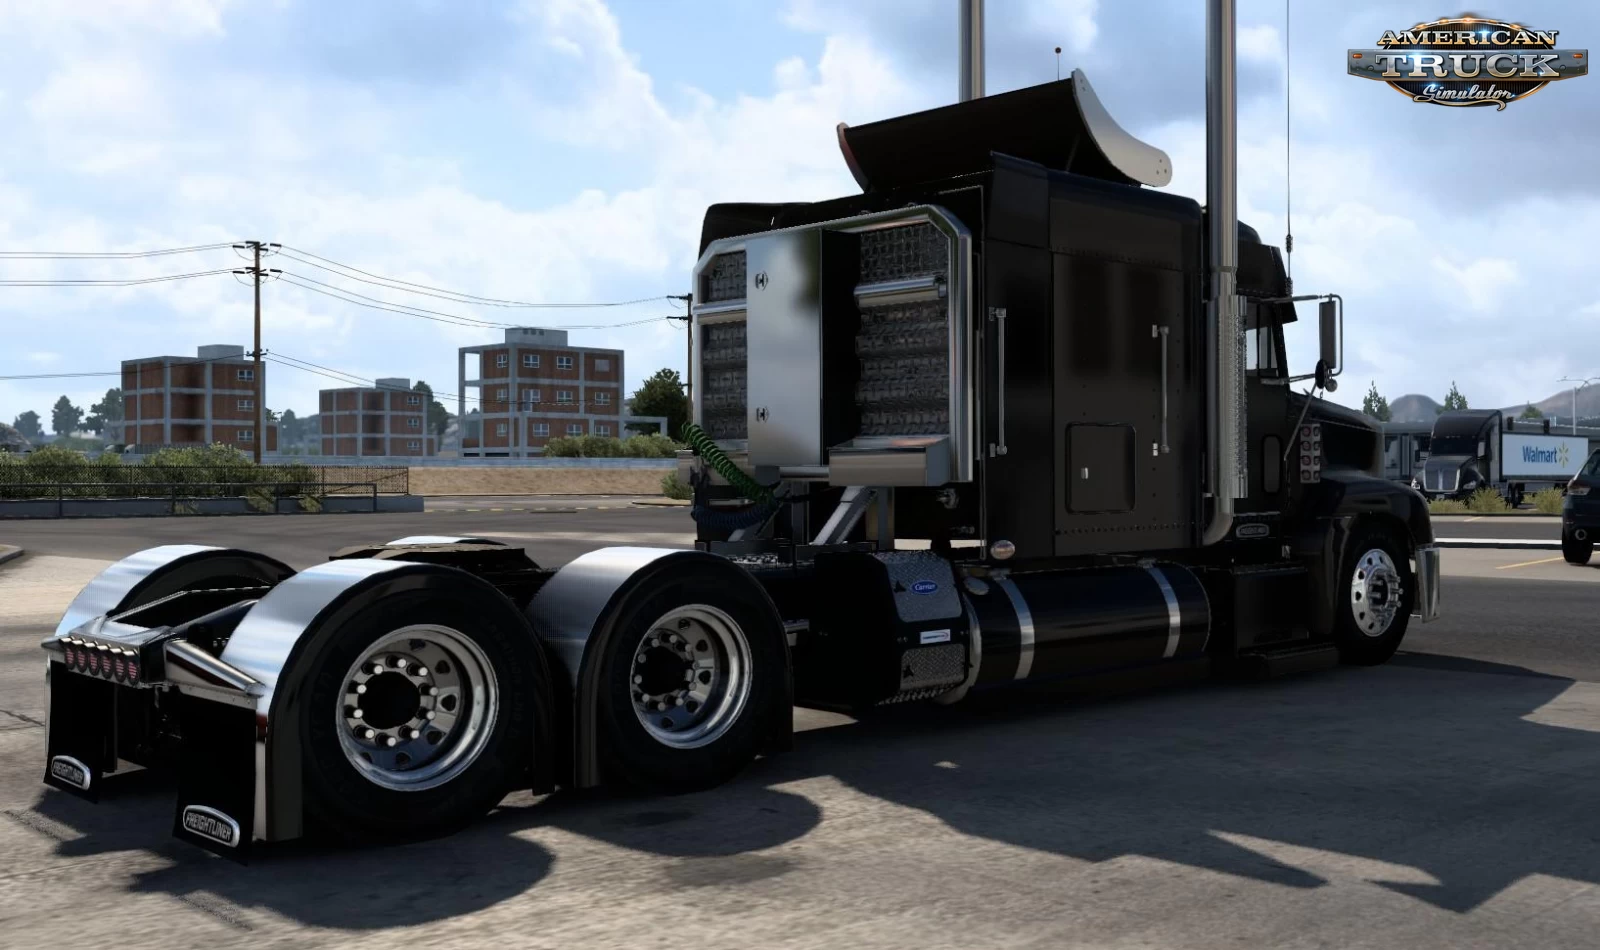 Freightliner FLD Custom v1.6 by ReneNate (1.44.x) for ATS